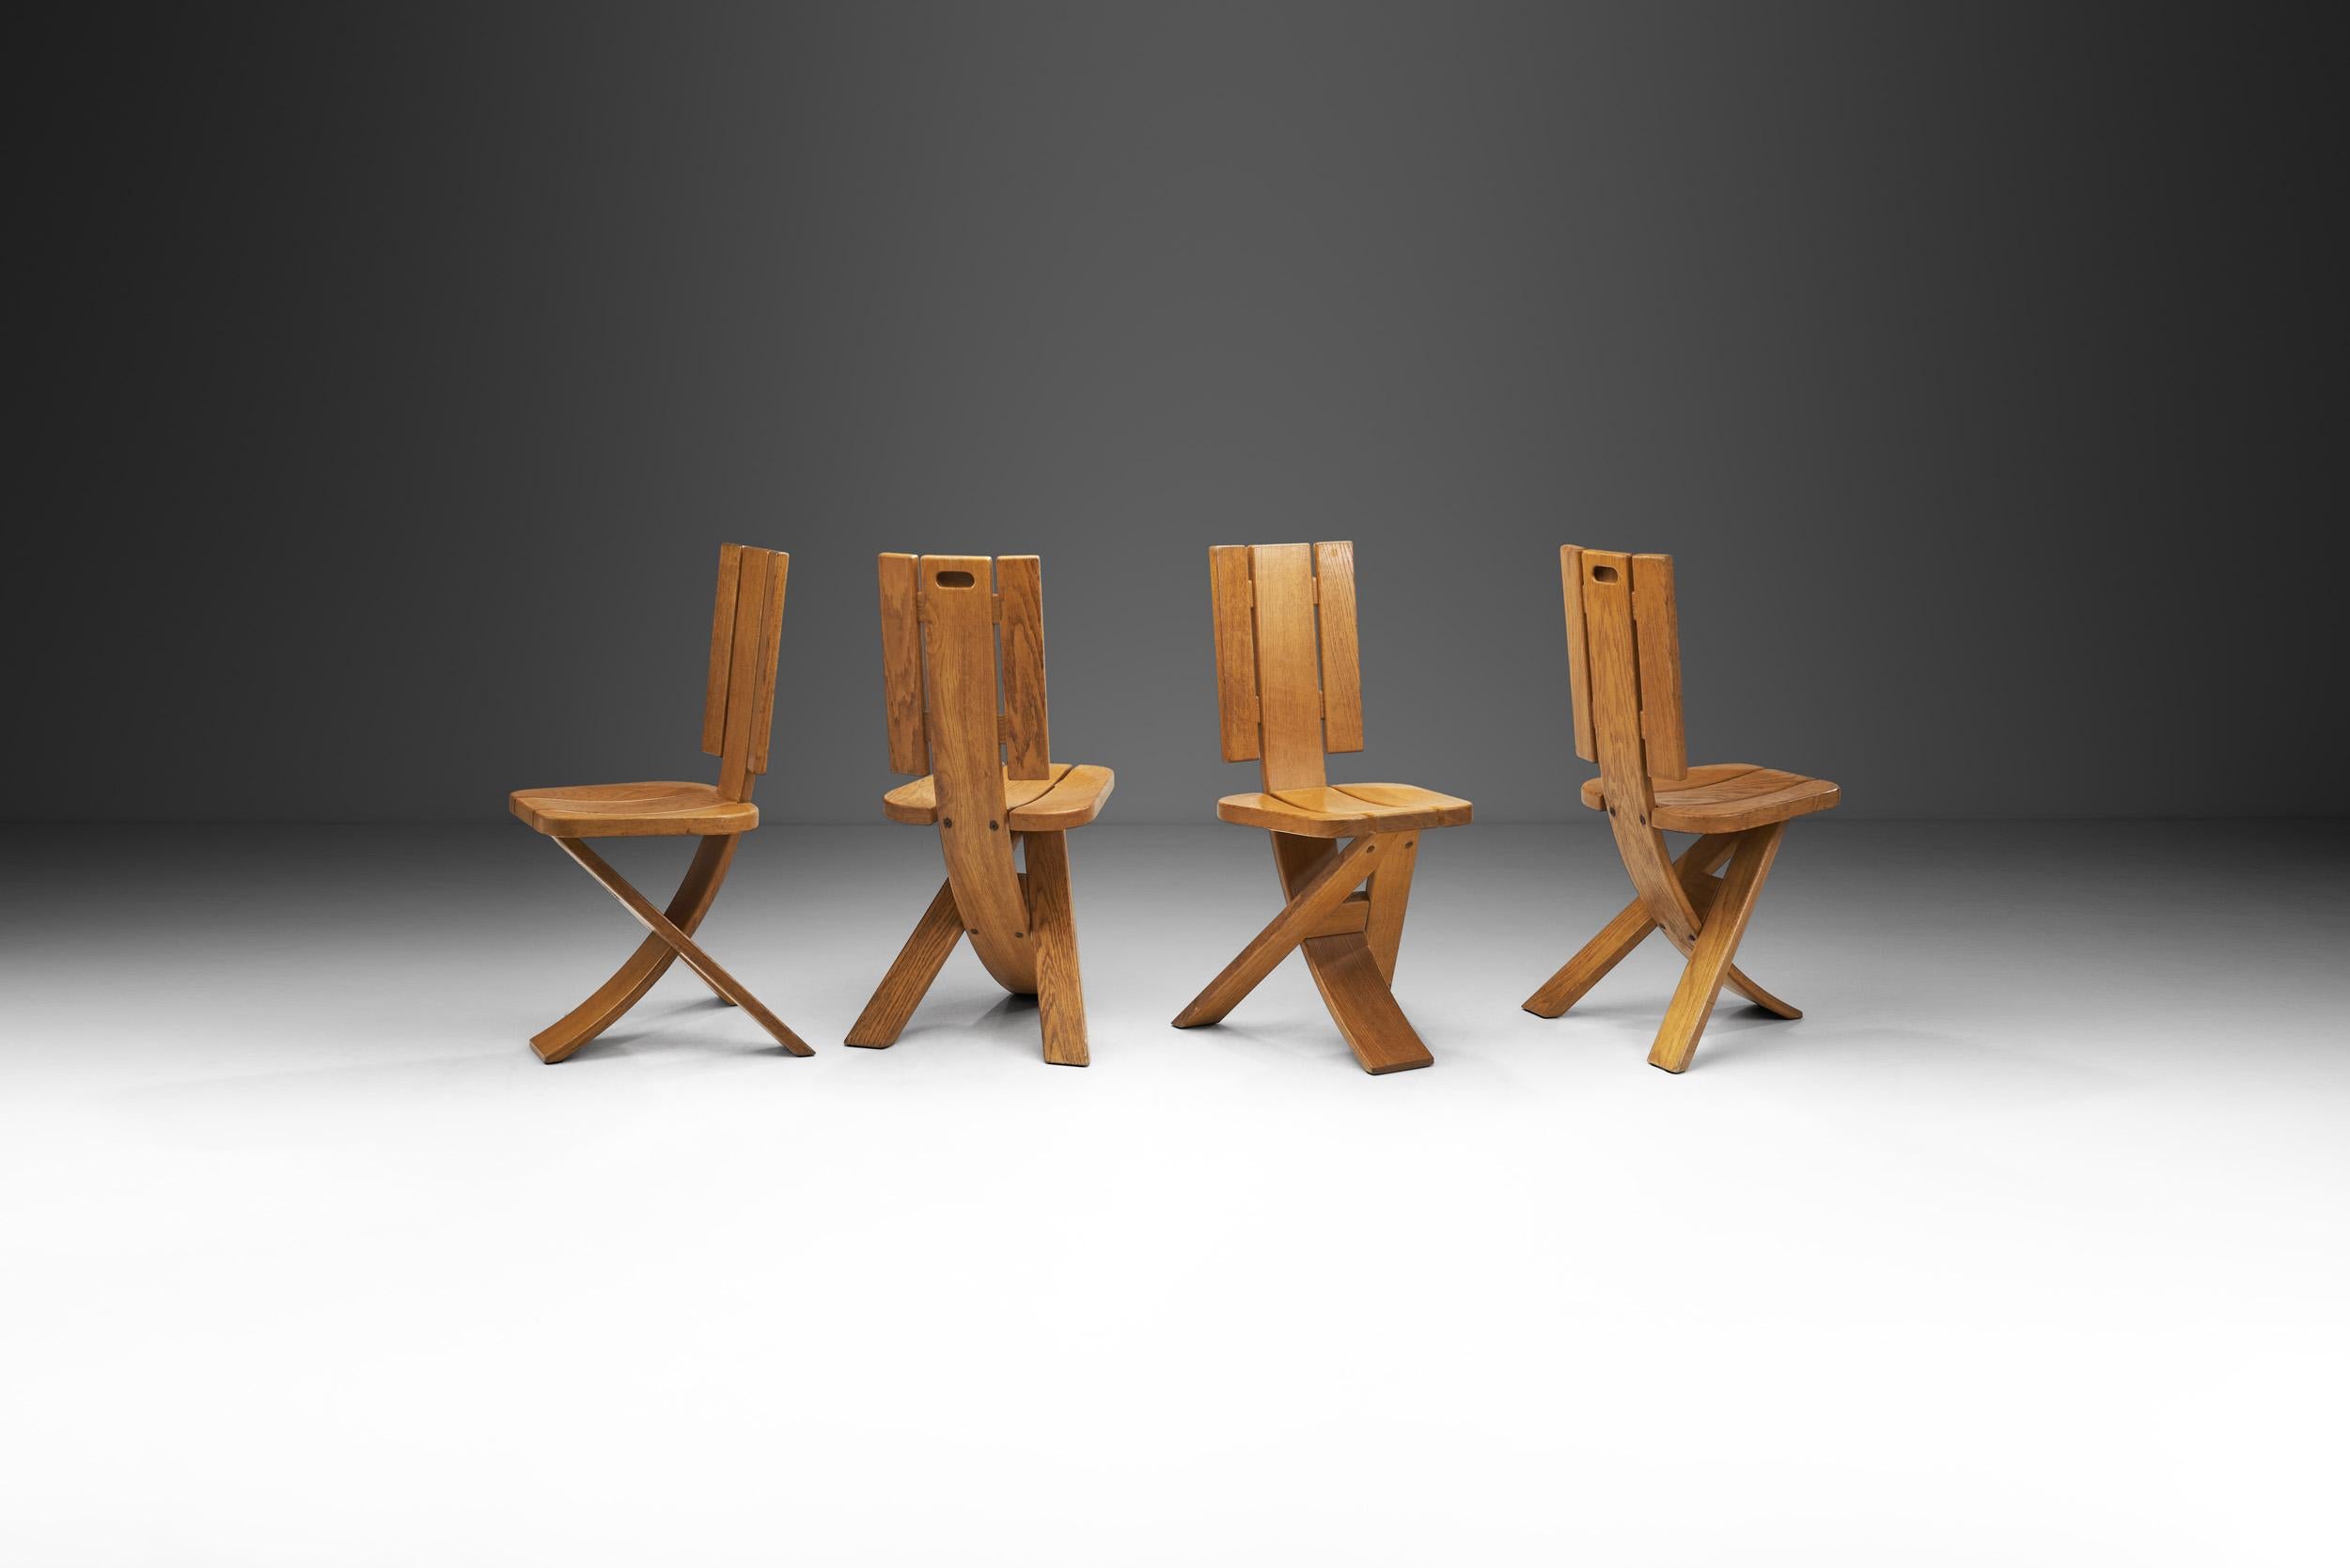 French Set of Four Sculptural Oak Tripod Chairs by Ebénisterie Seltz, France, 1970s For Sale